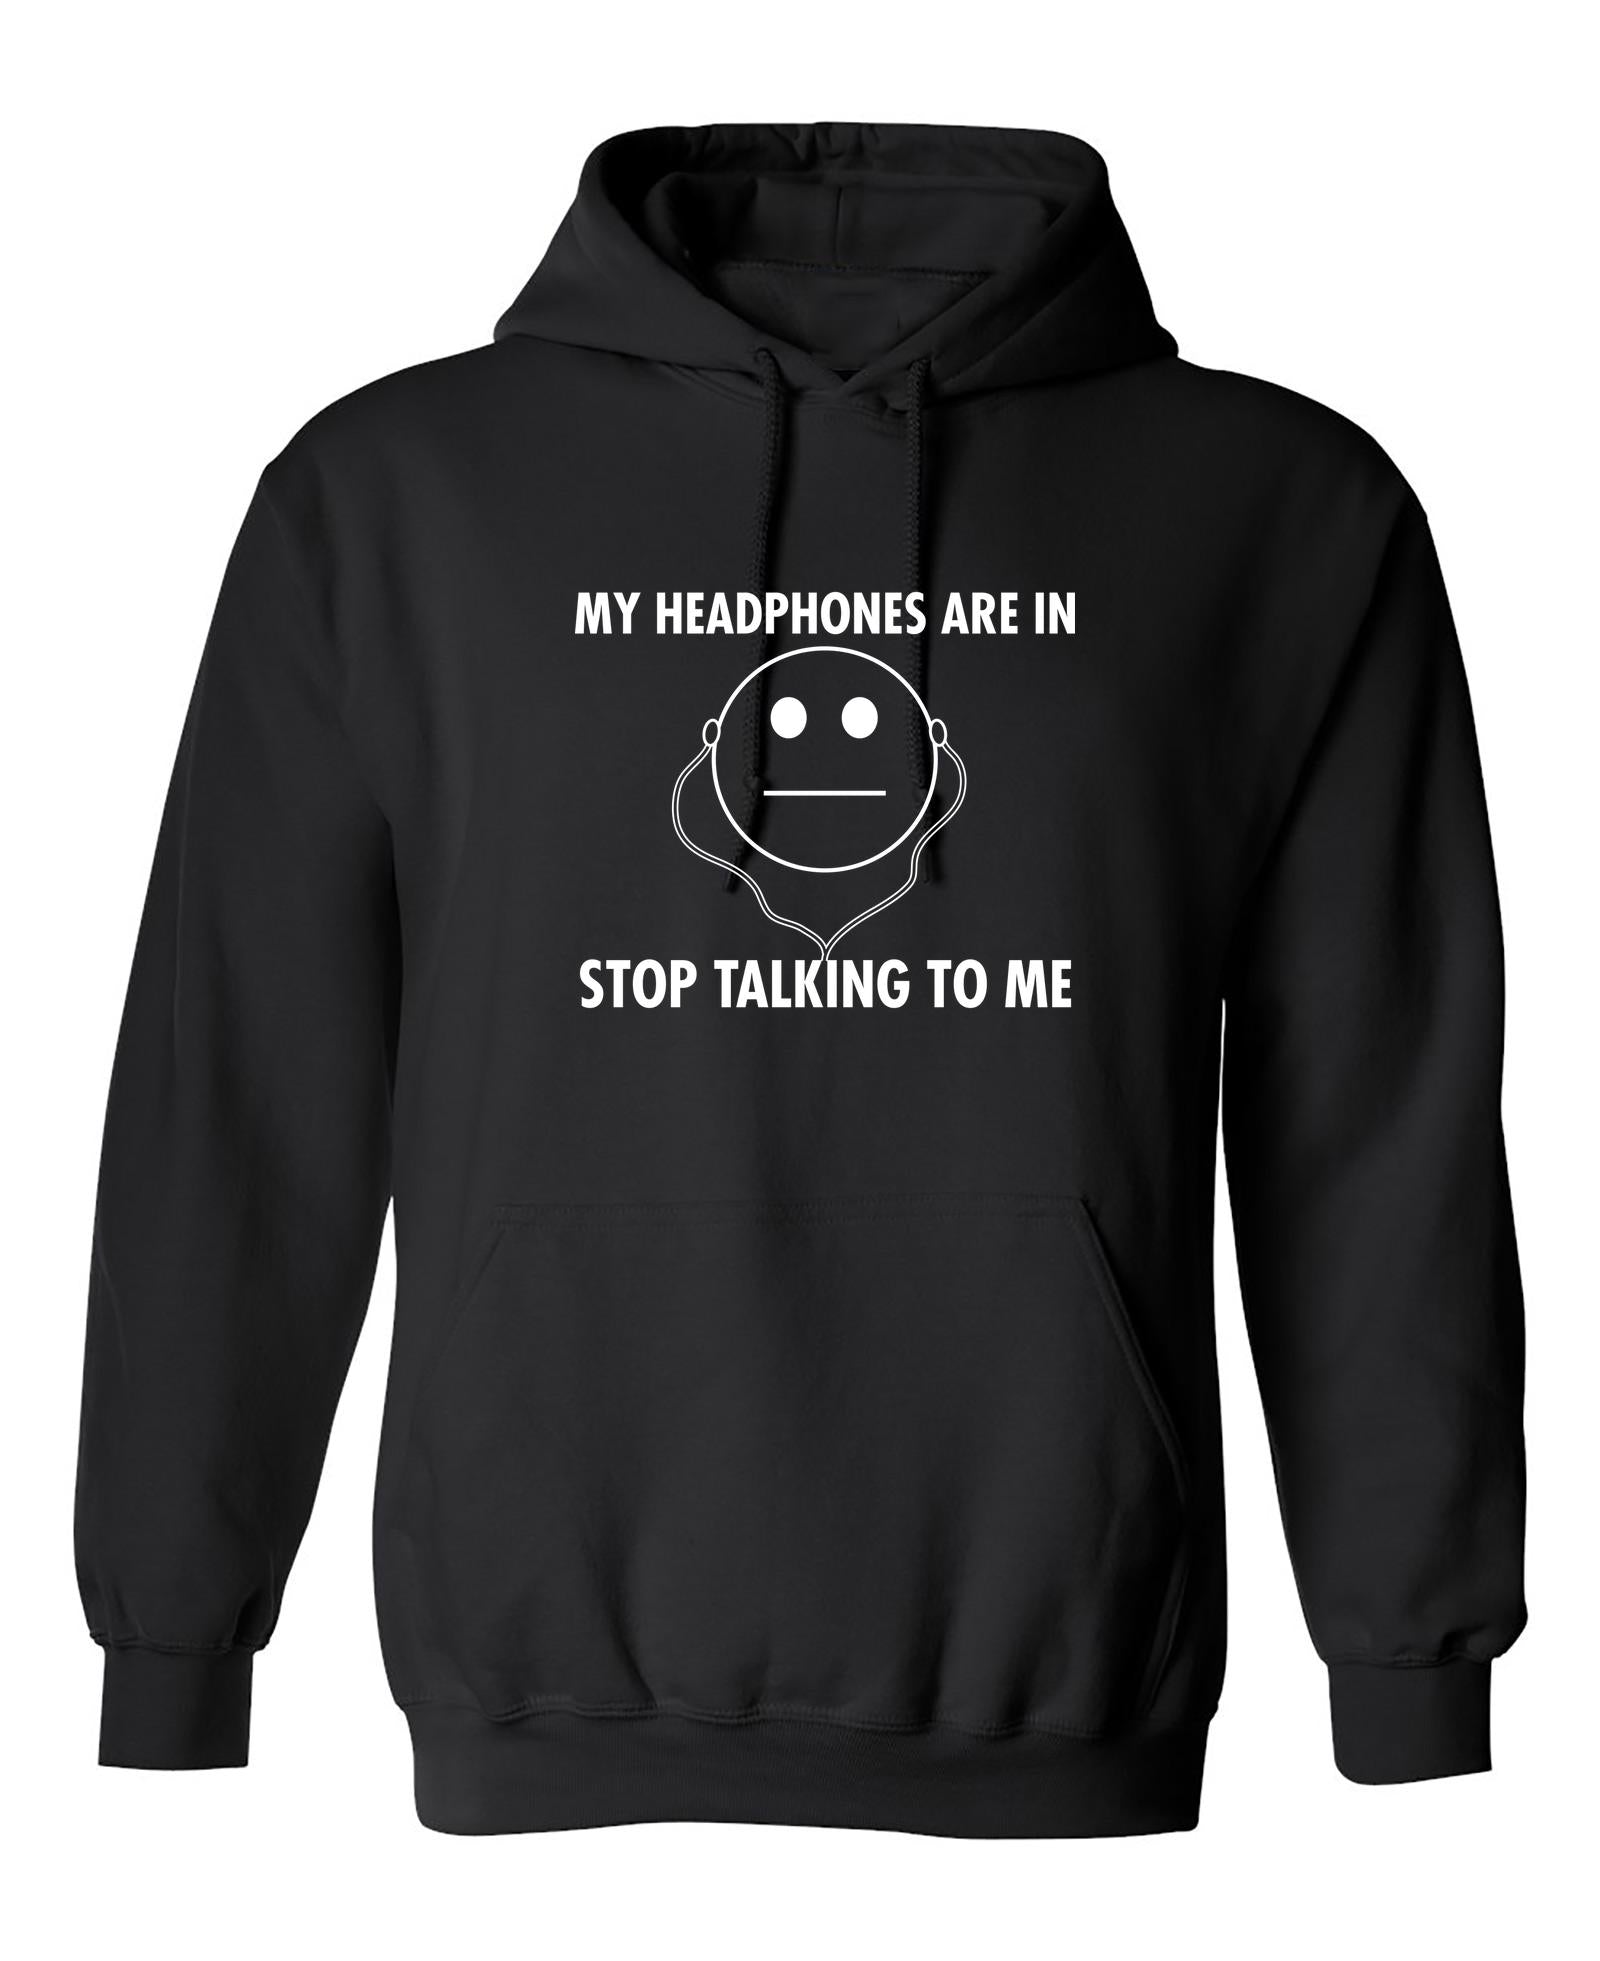 Funny T-Shirts design "My Headphones are In Stop Talking"